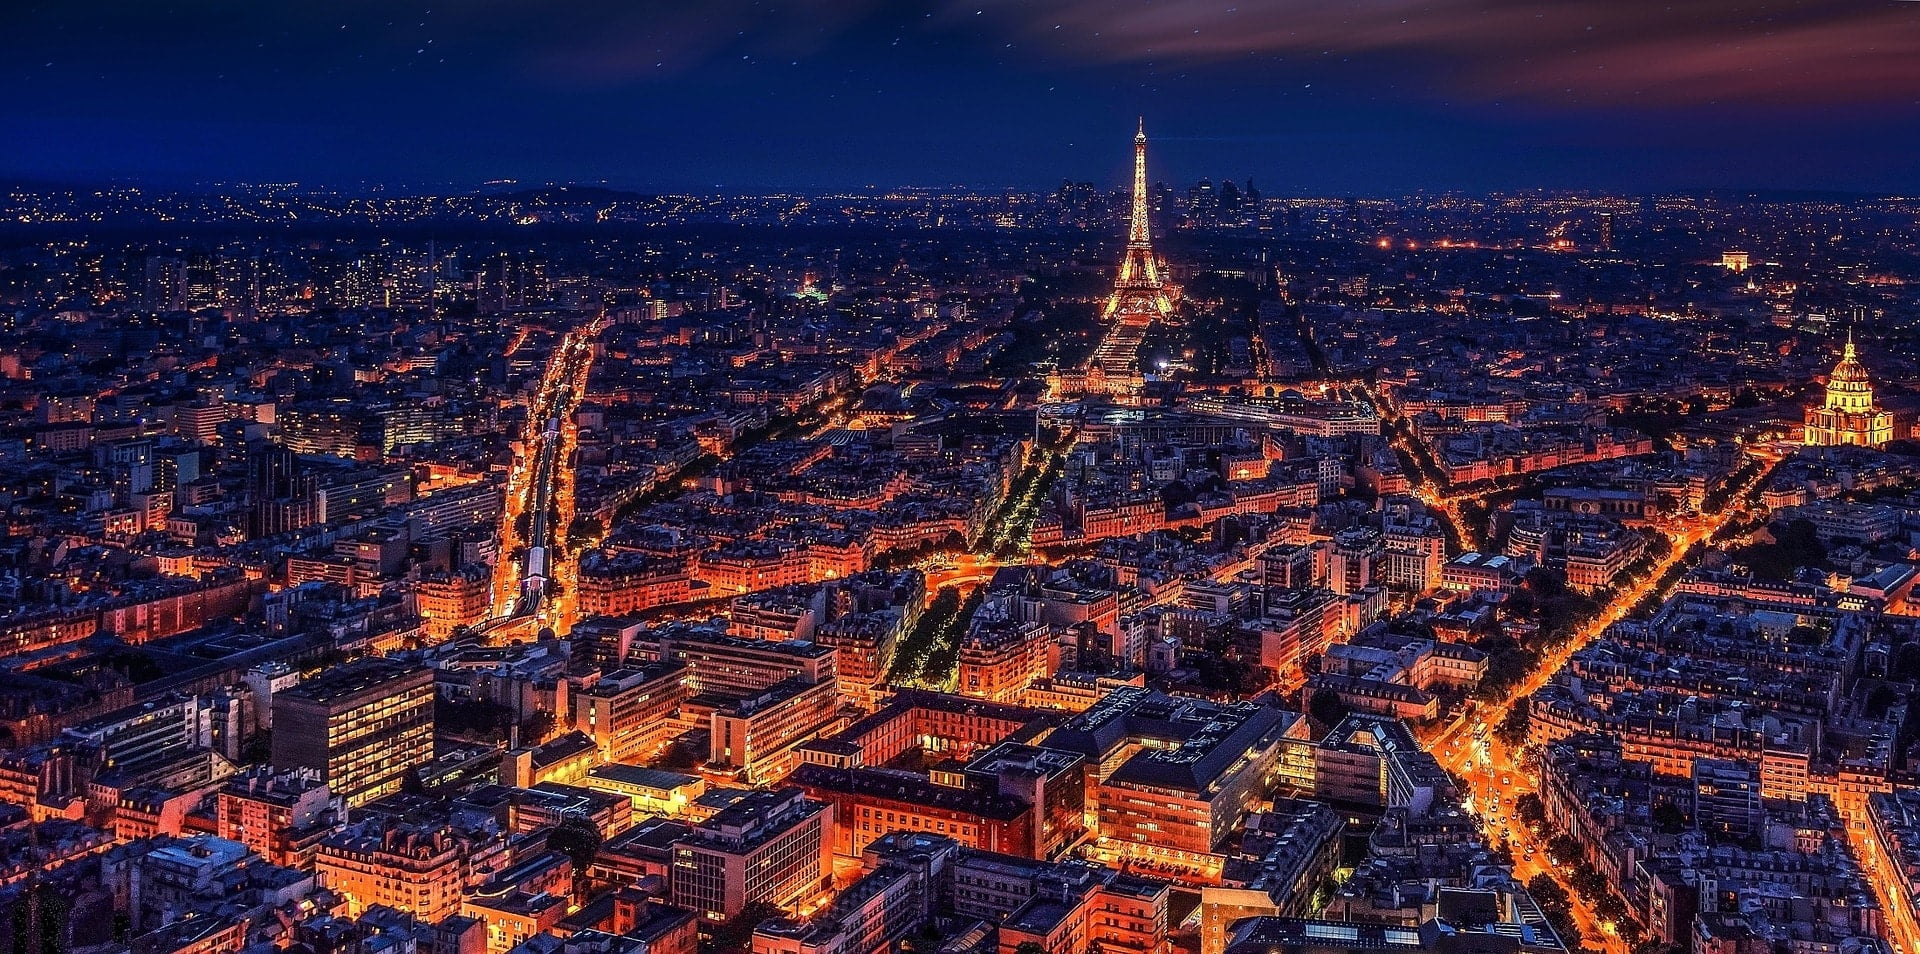 A beautiful night-shot of Paris. Picture from Pixabay.